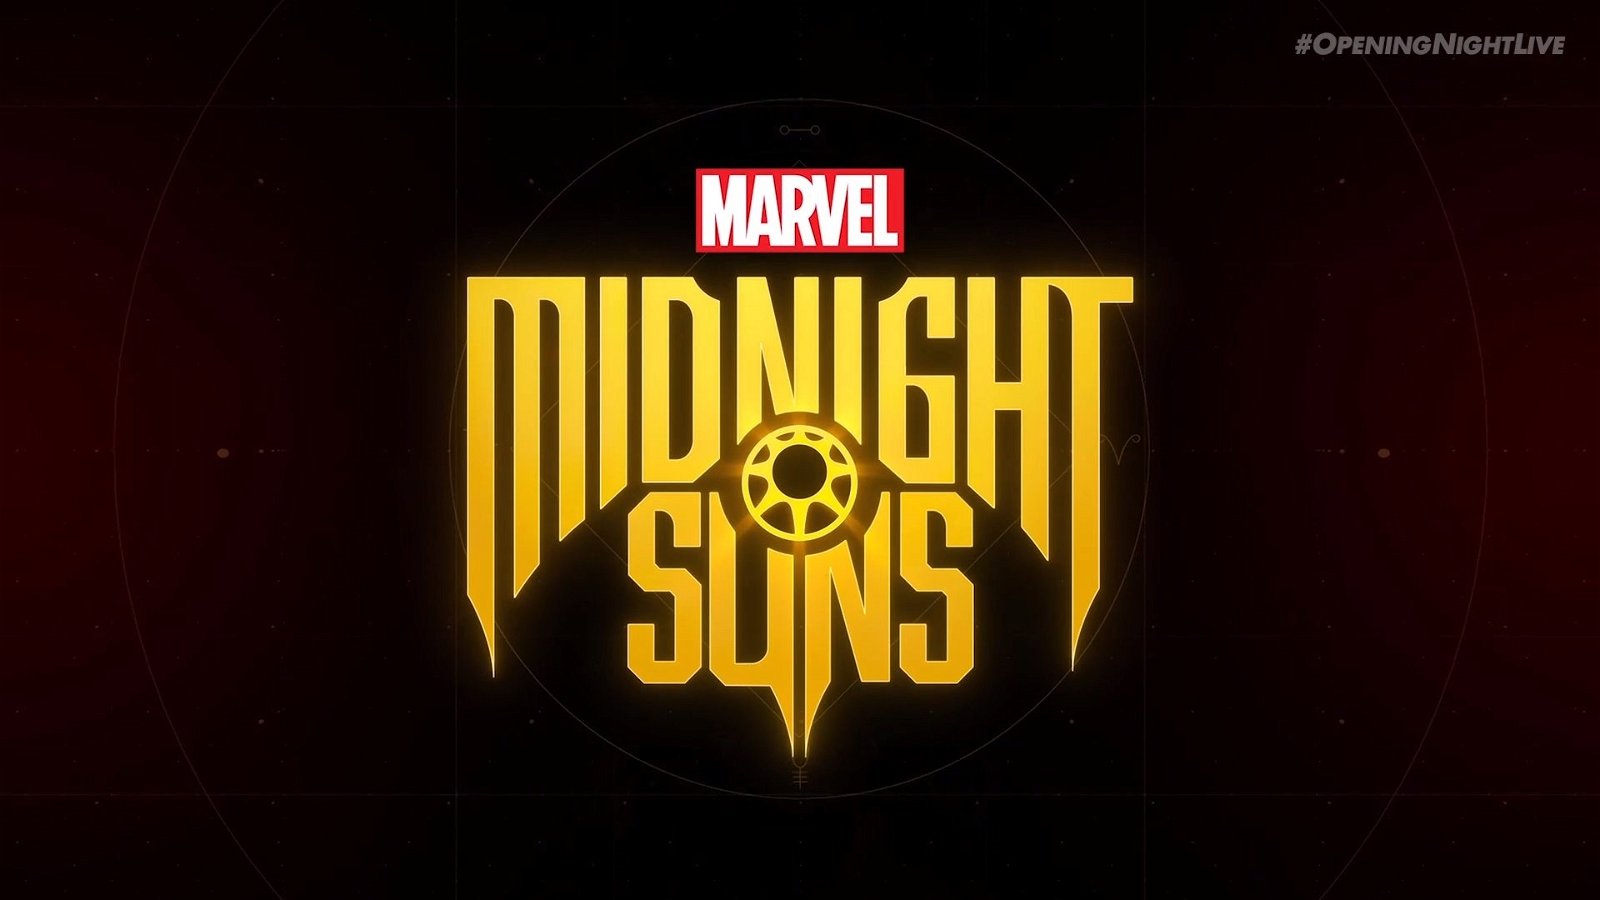 Marvel's Midnight Suns will reappear at Summer Game Fest